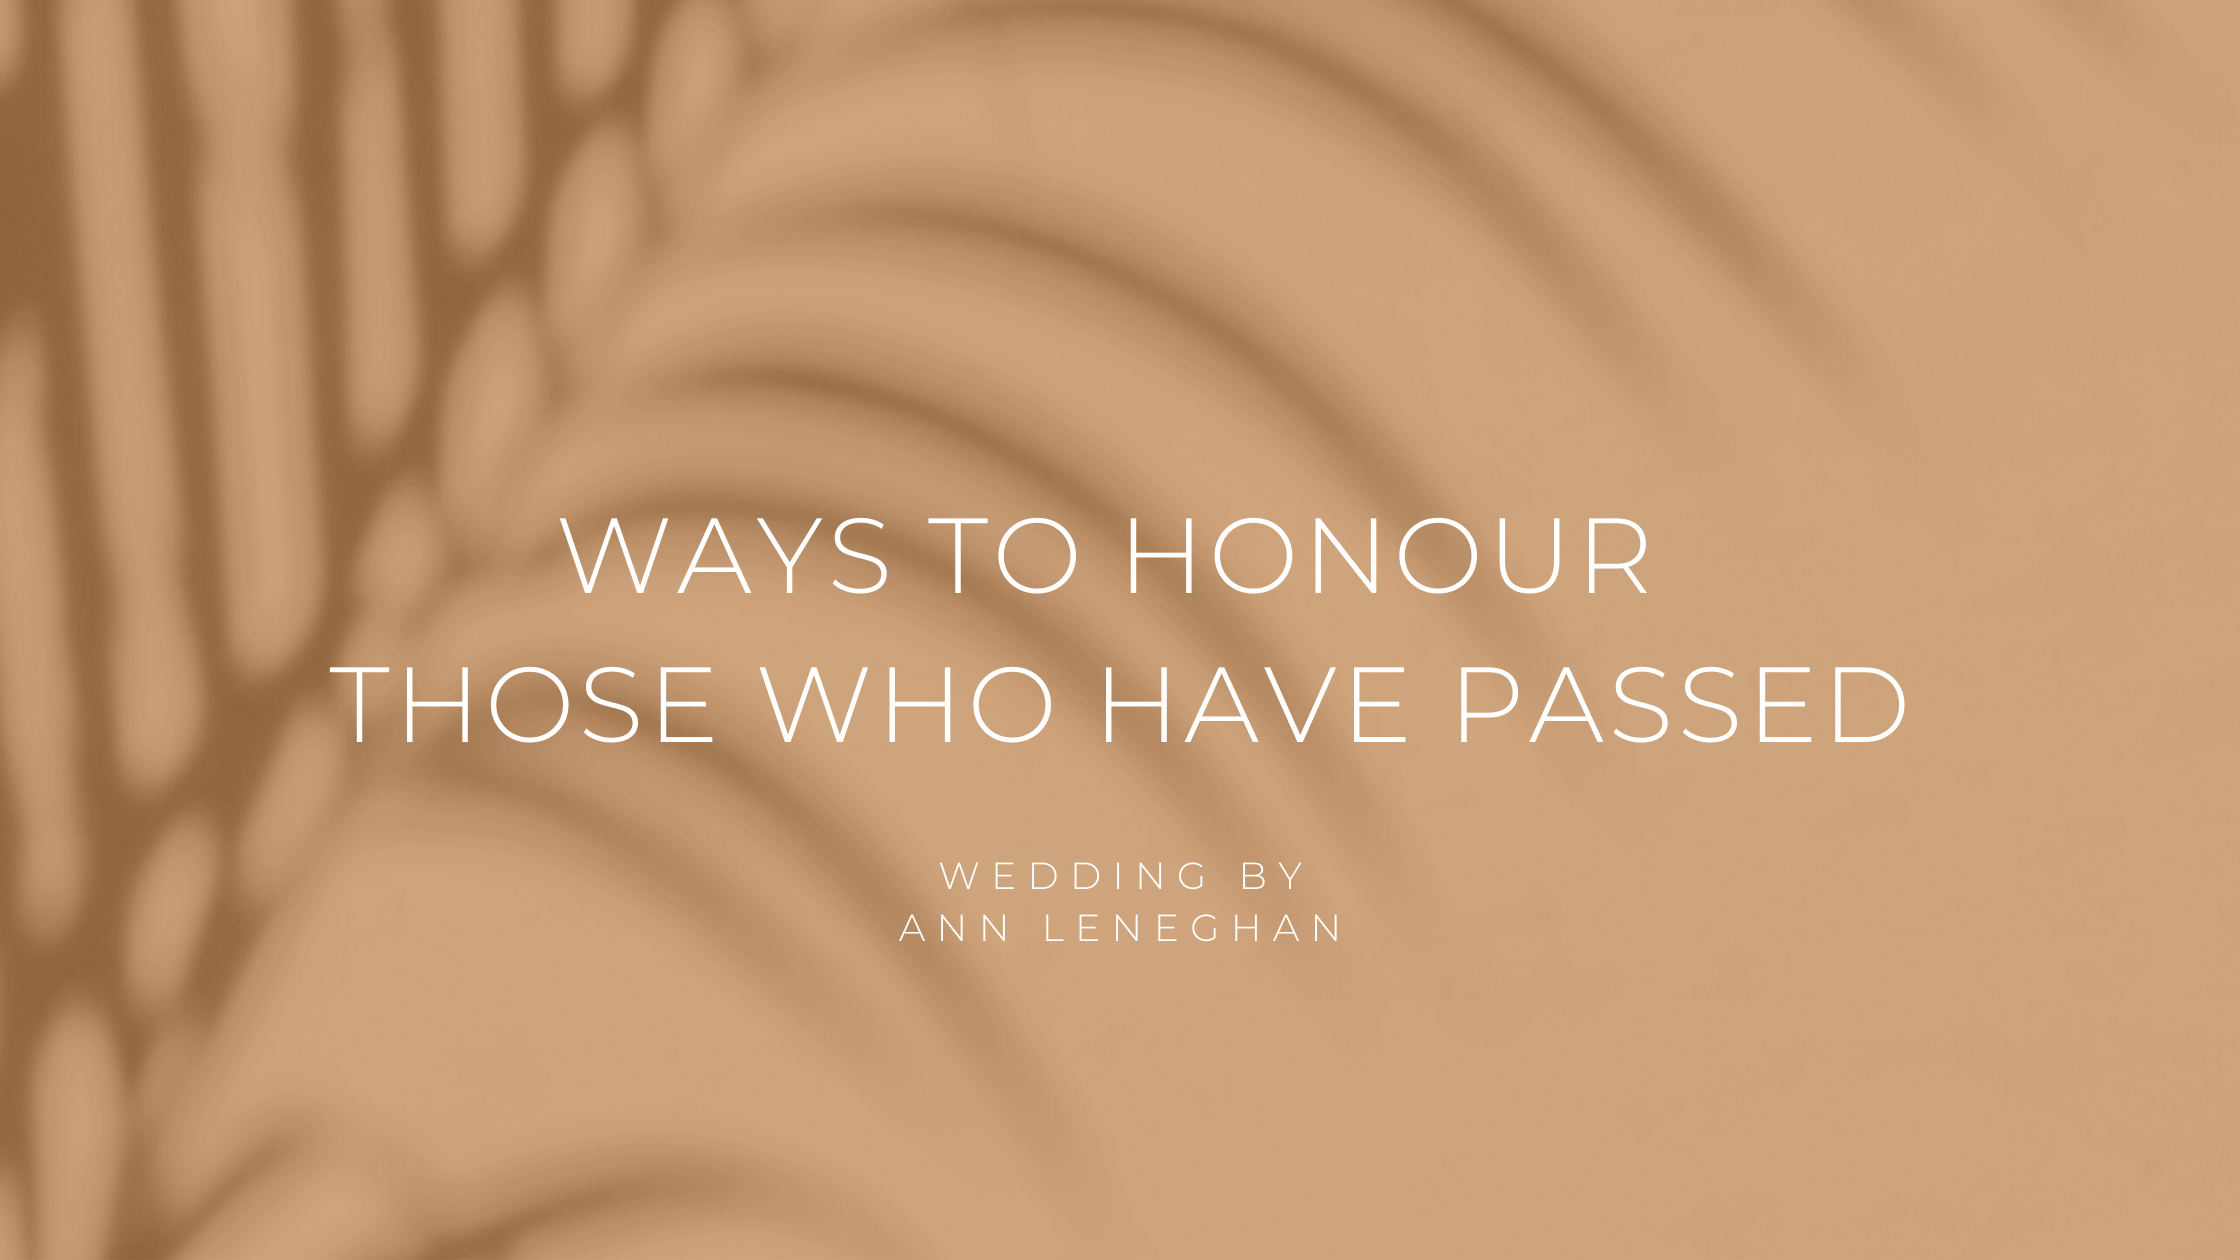 Ways to honour those who have passed